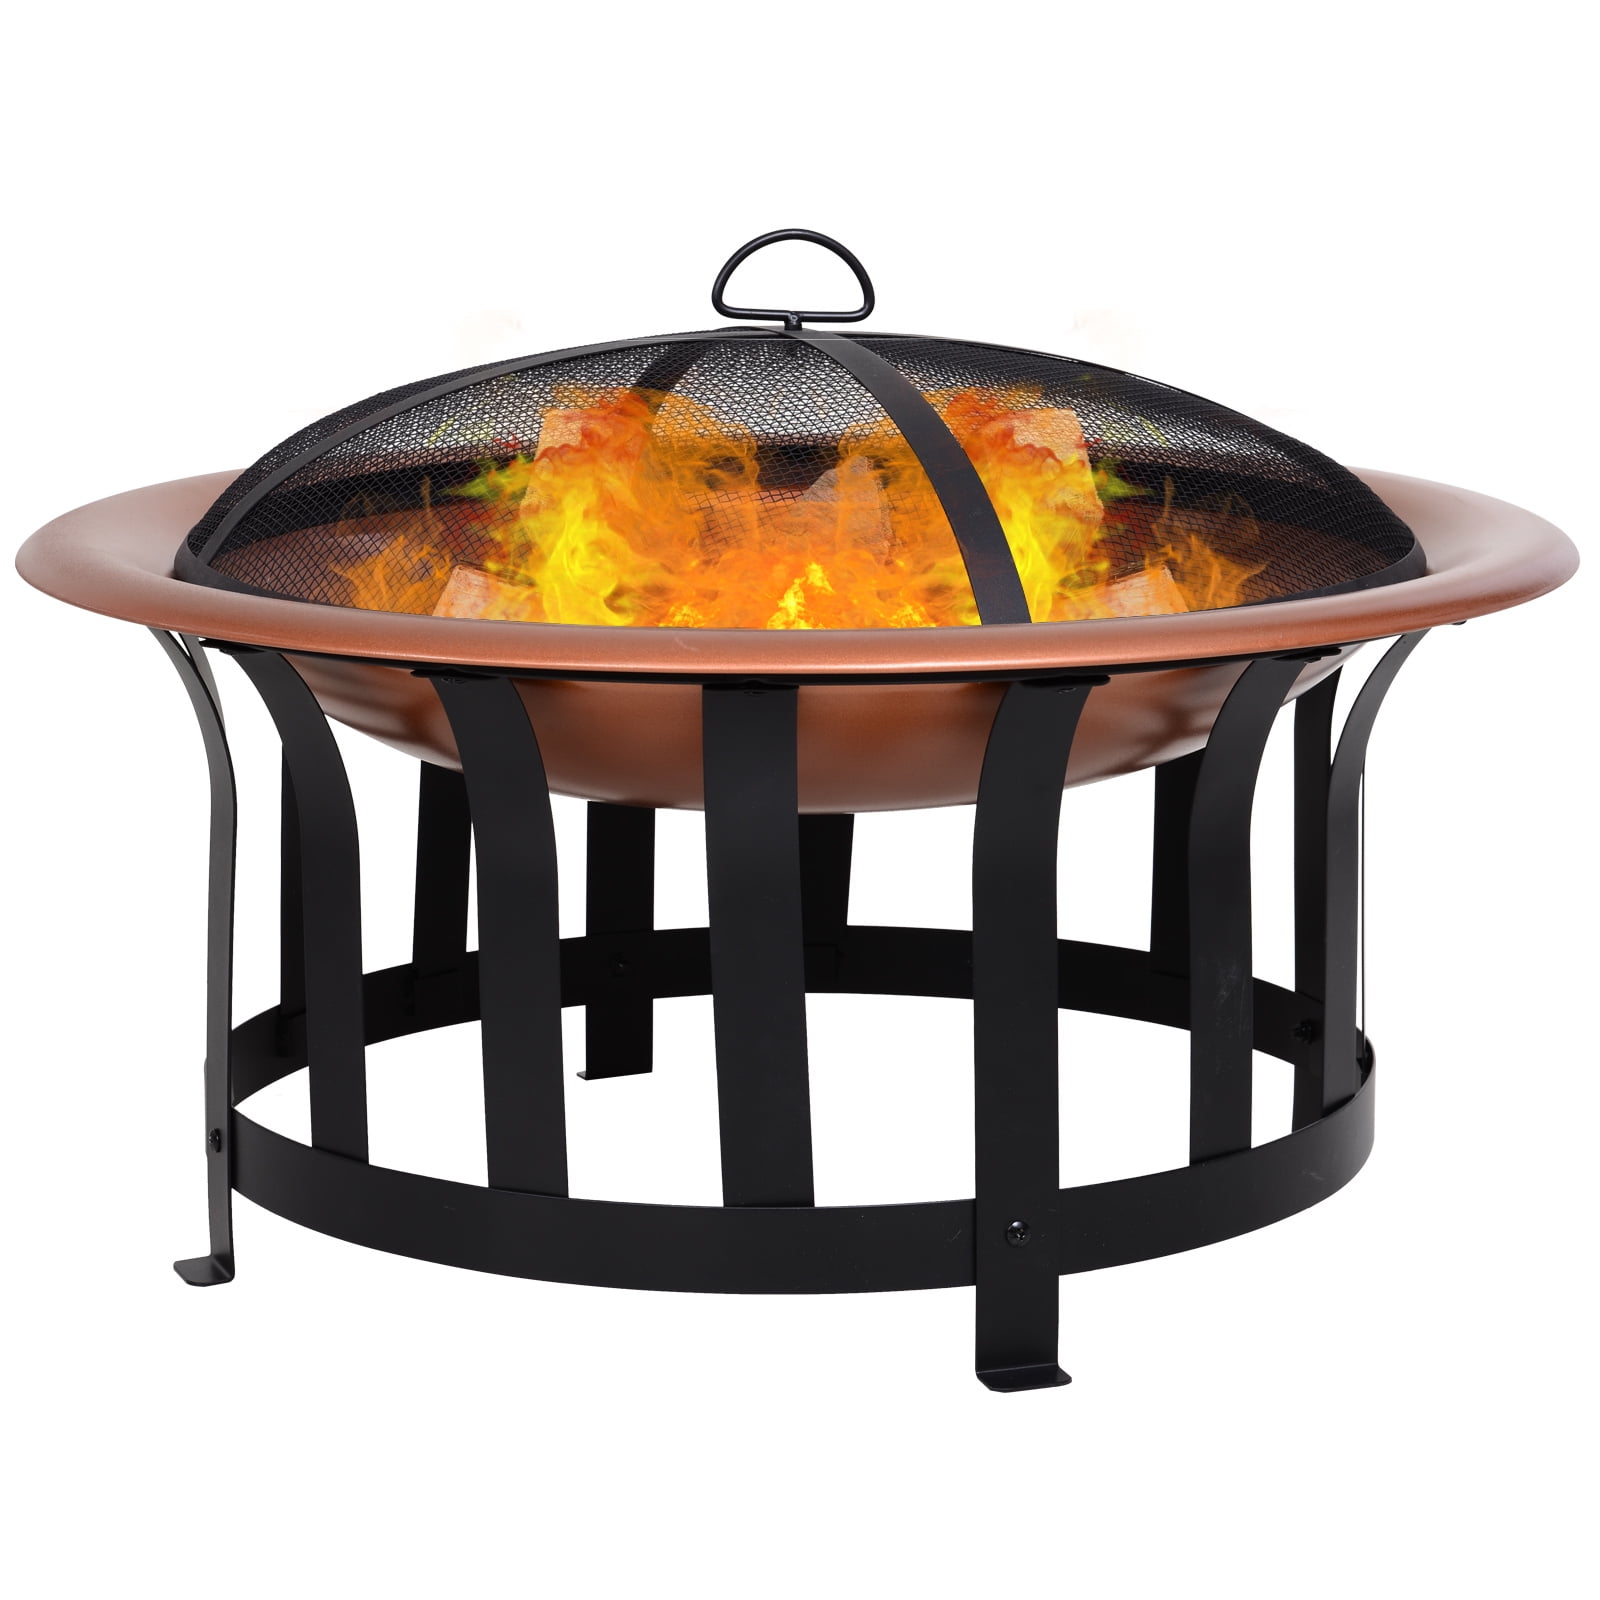 Outsunny Copper Colored Round Metal Wood Fire Pit Bowl With Black Ornate Base Poker Mesh Screen For Ember Protection Walmart Com